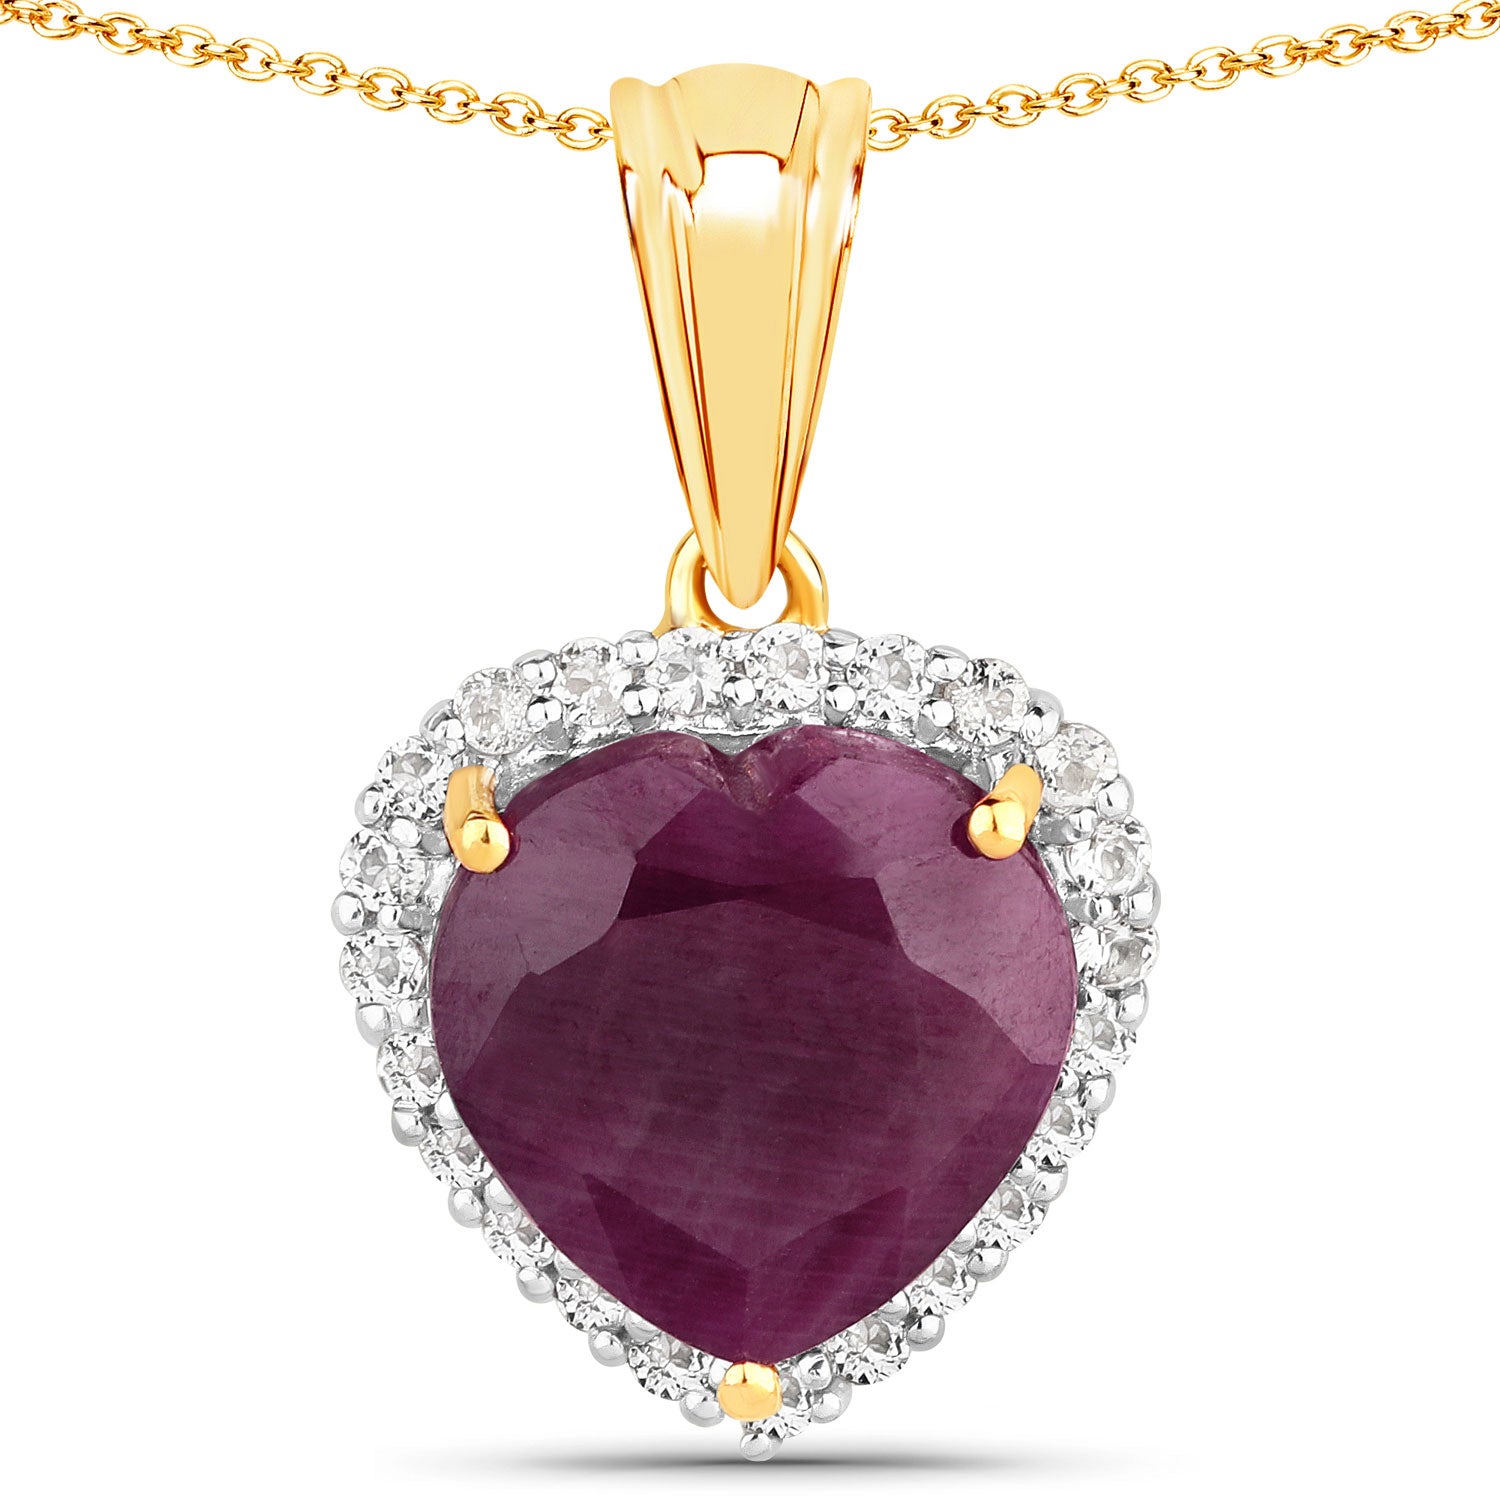 7.11 Carat Ruby and White Topaz .925 Sterling Silver Pendant